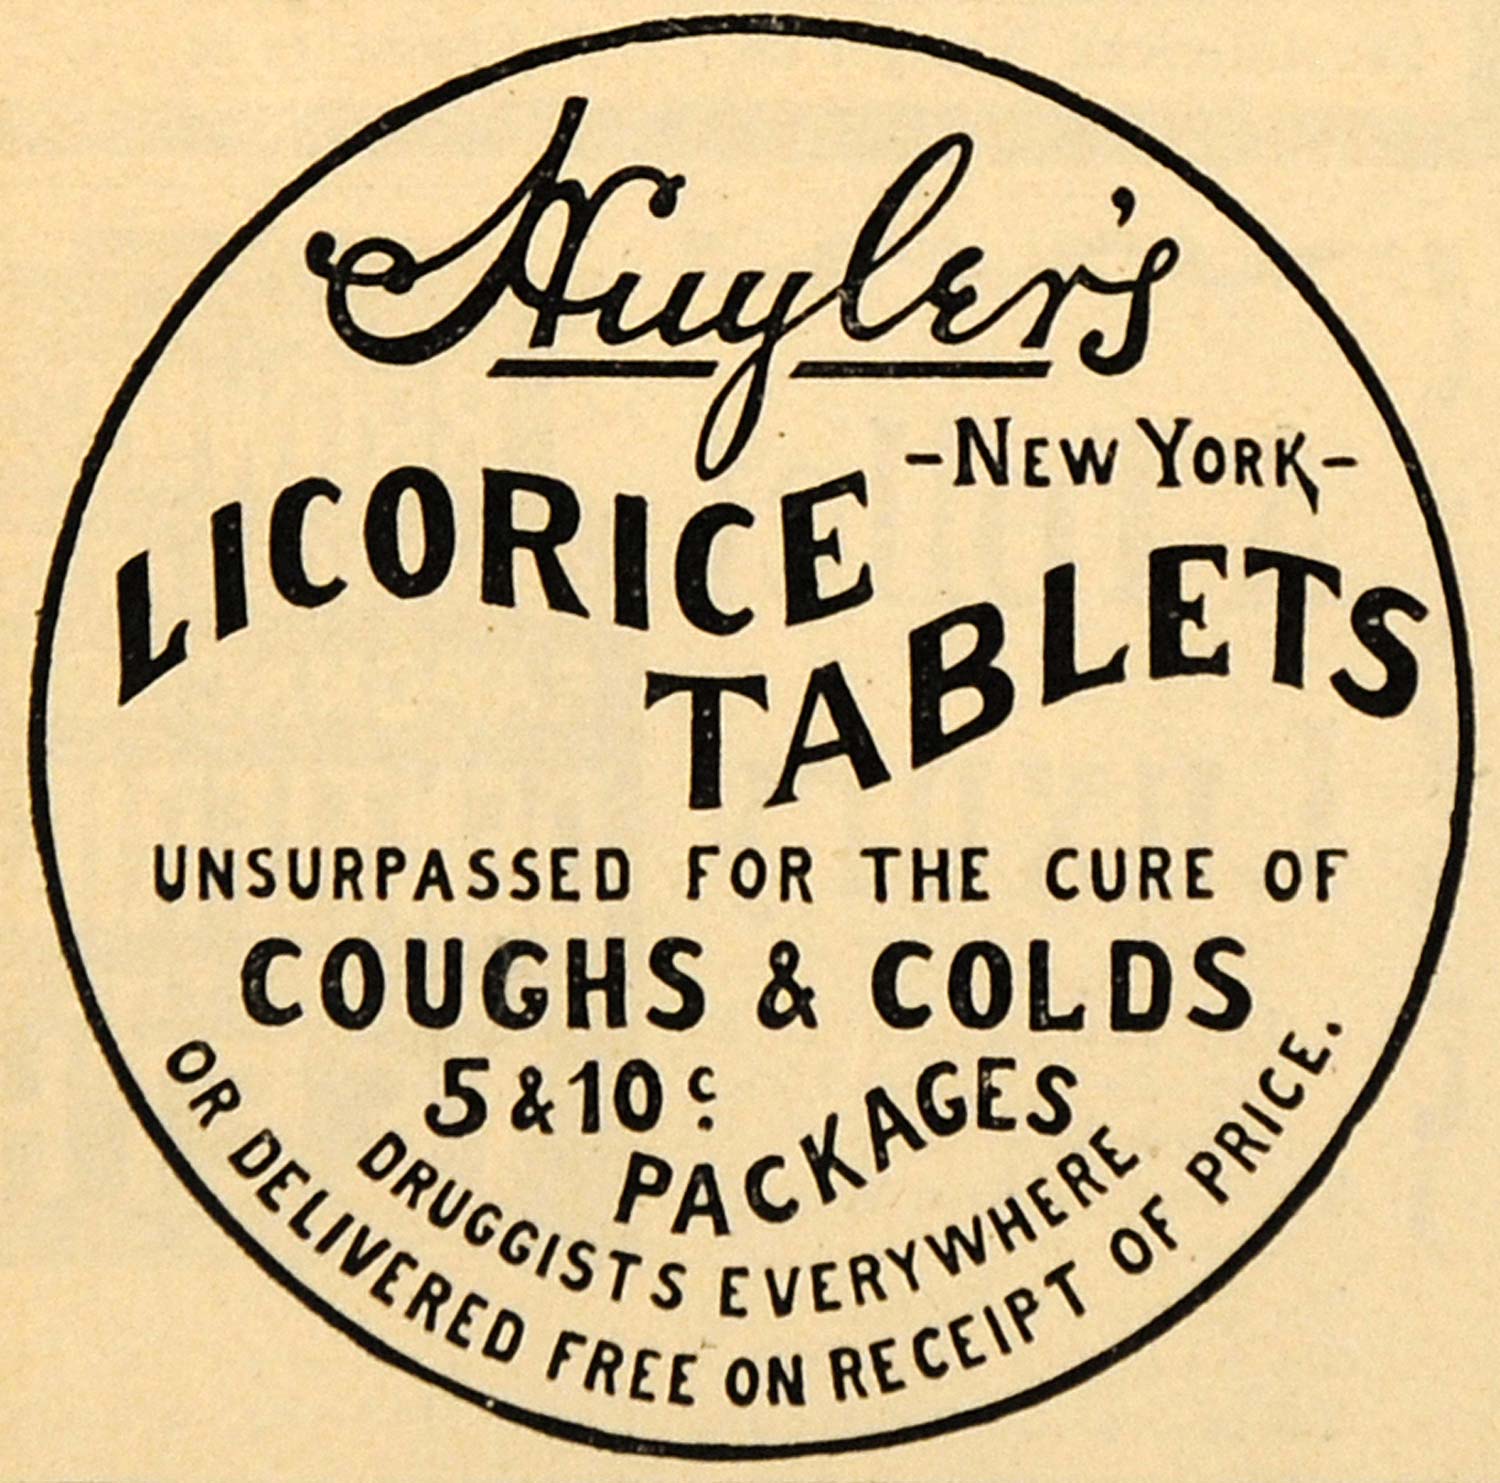 1901 Ad Huyler's Licorice Tablets Cough Cold Drug Advertisement Advertising MX5